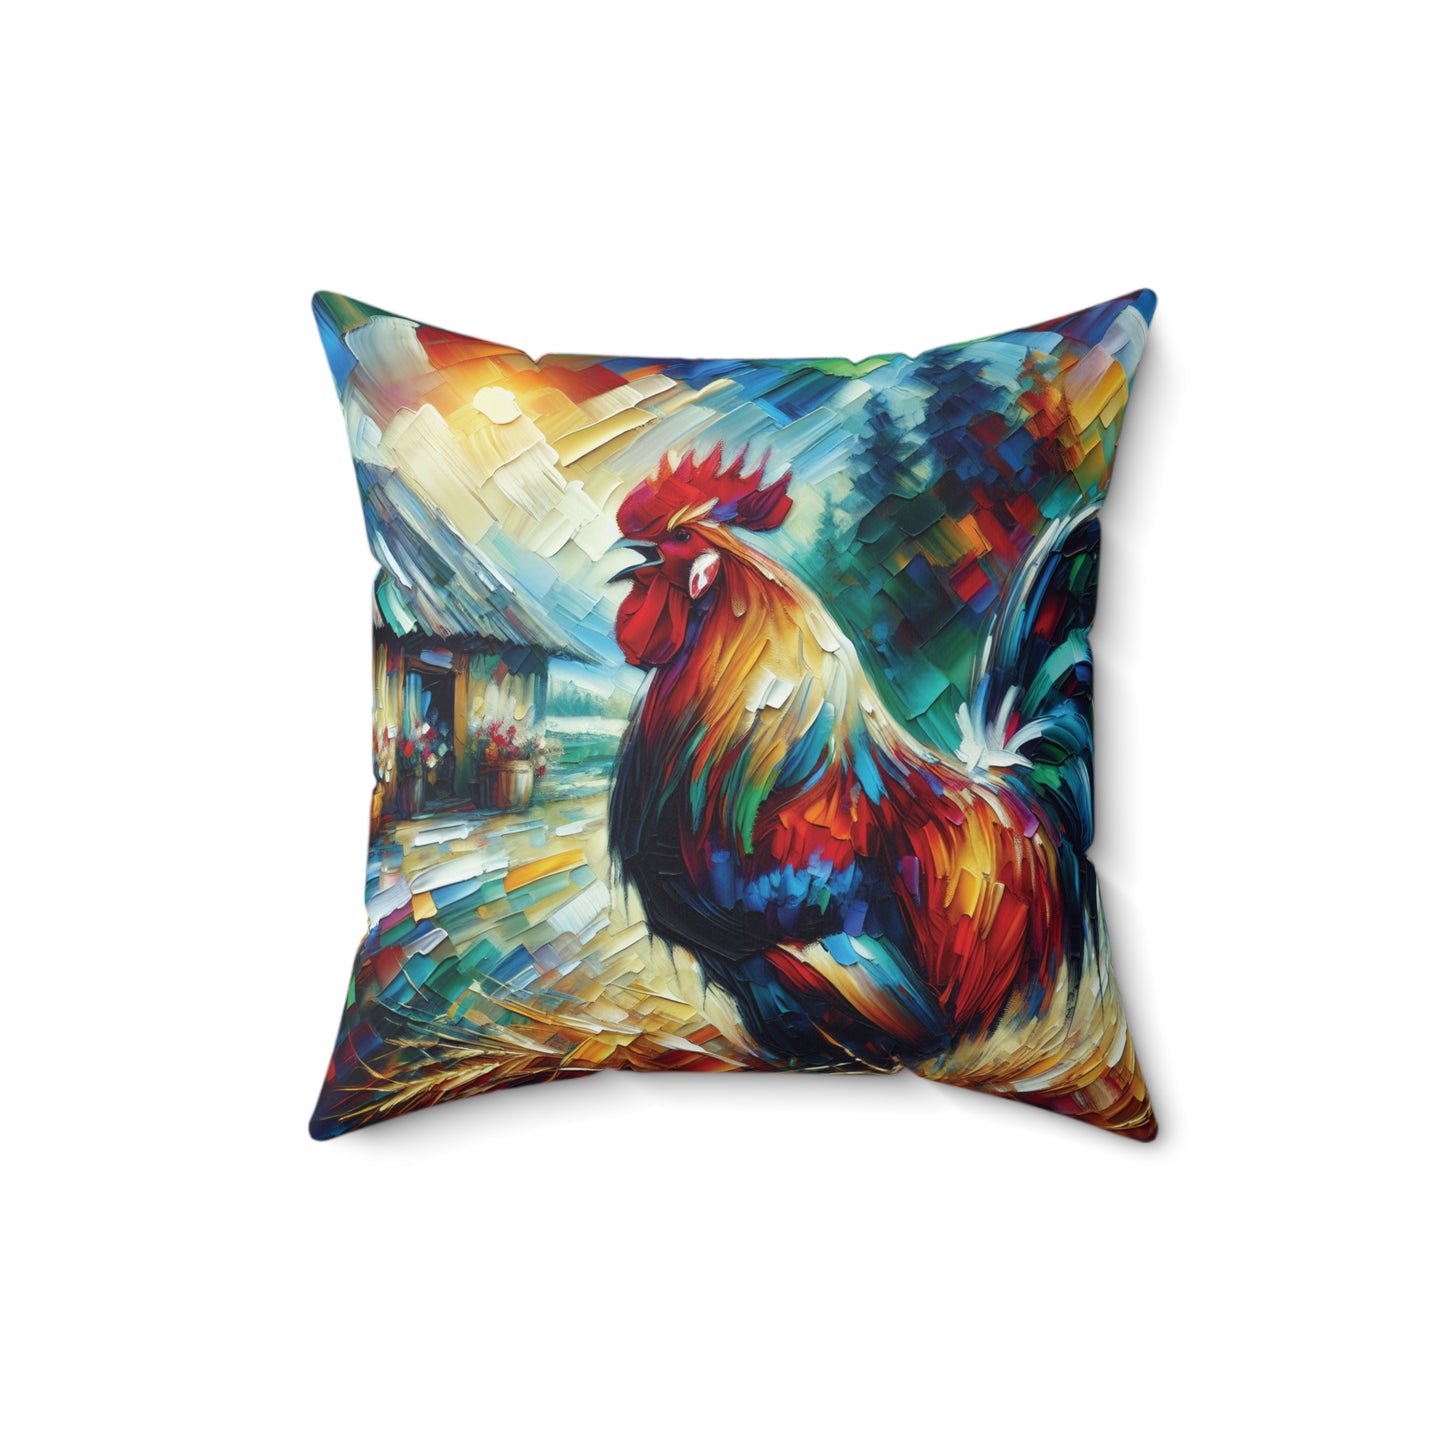 Rooster Morning - Square Pillow